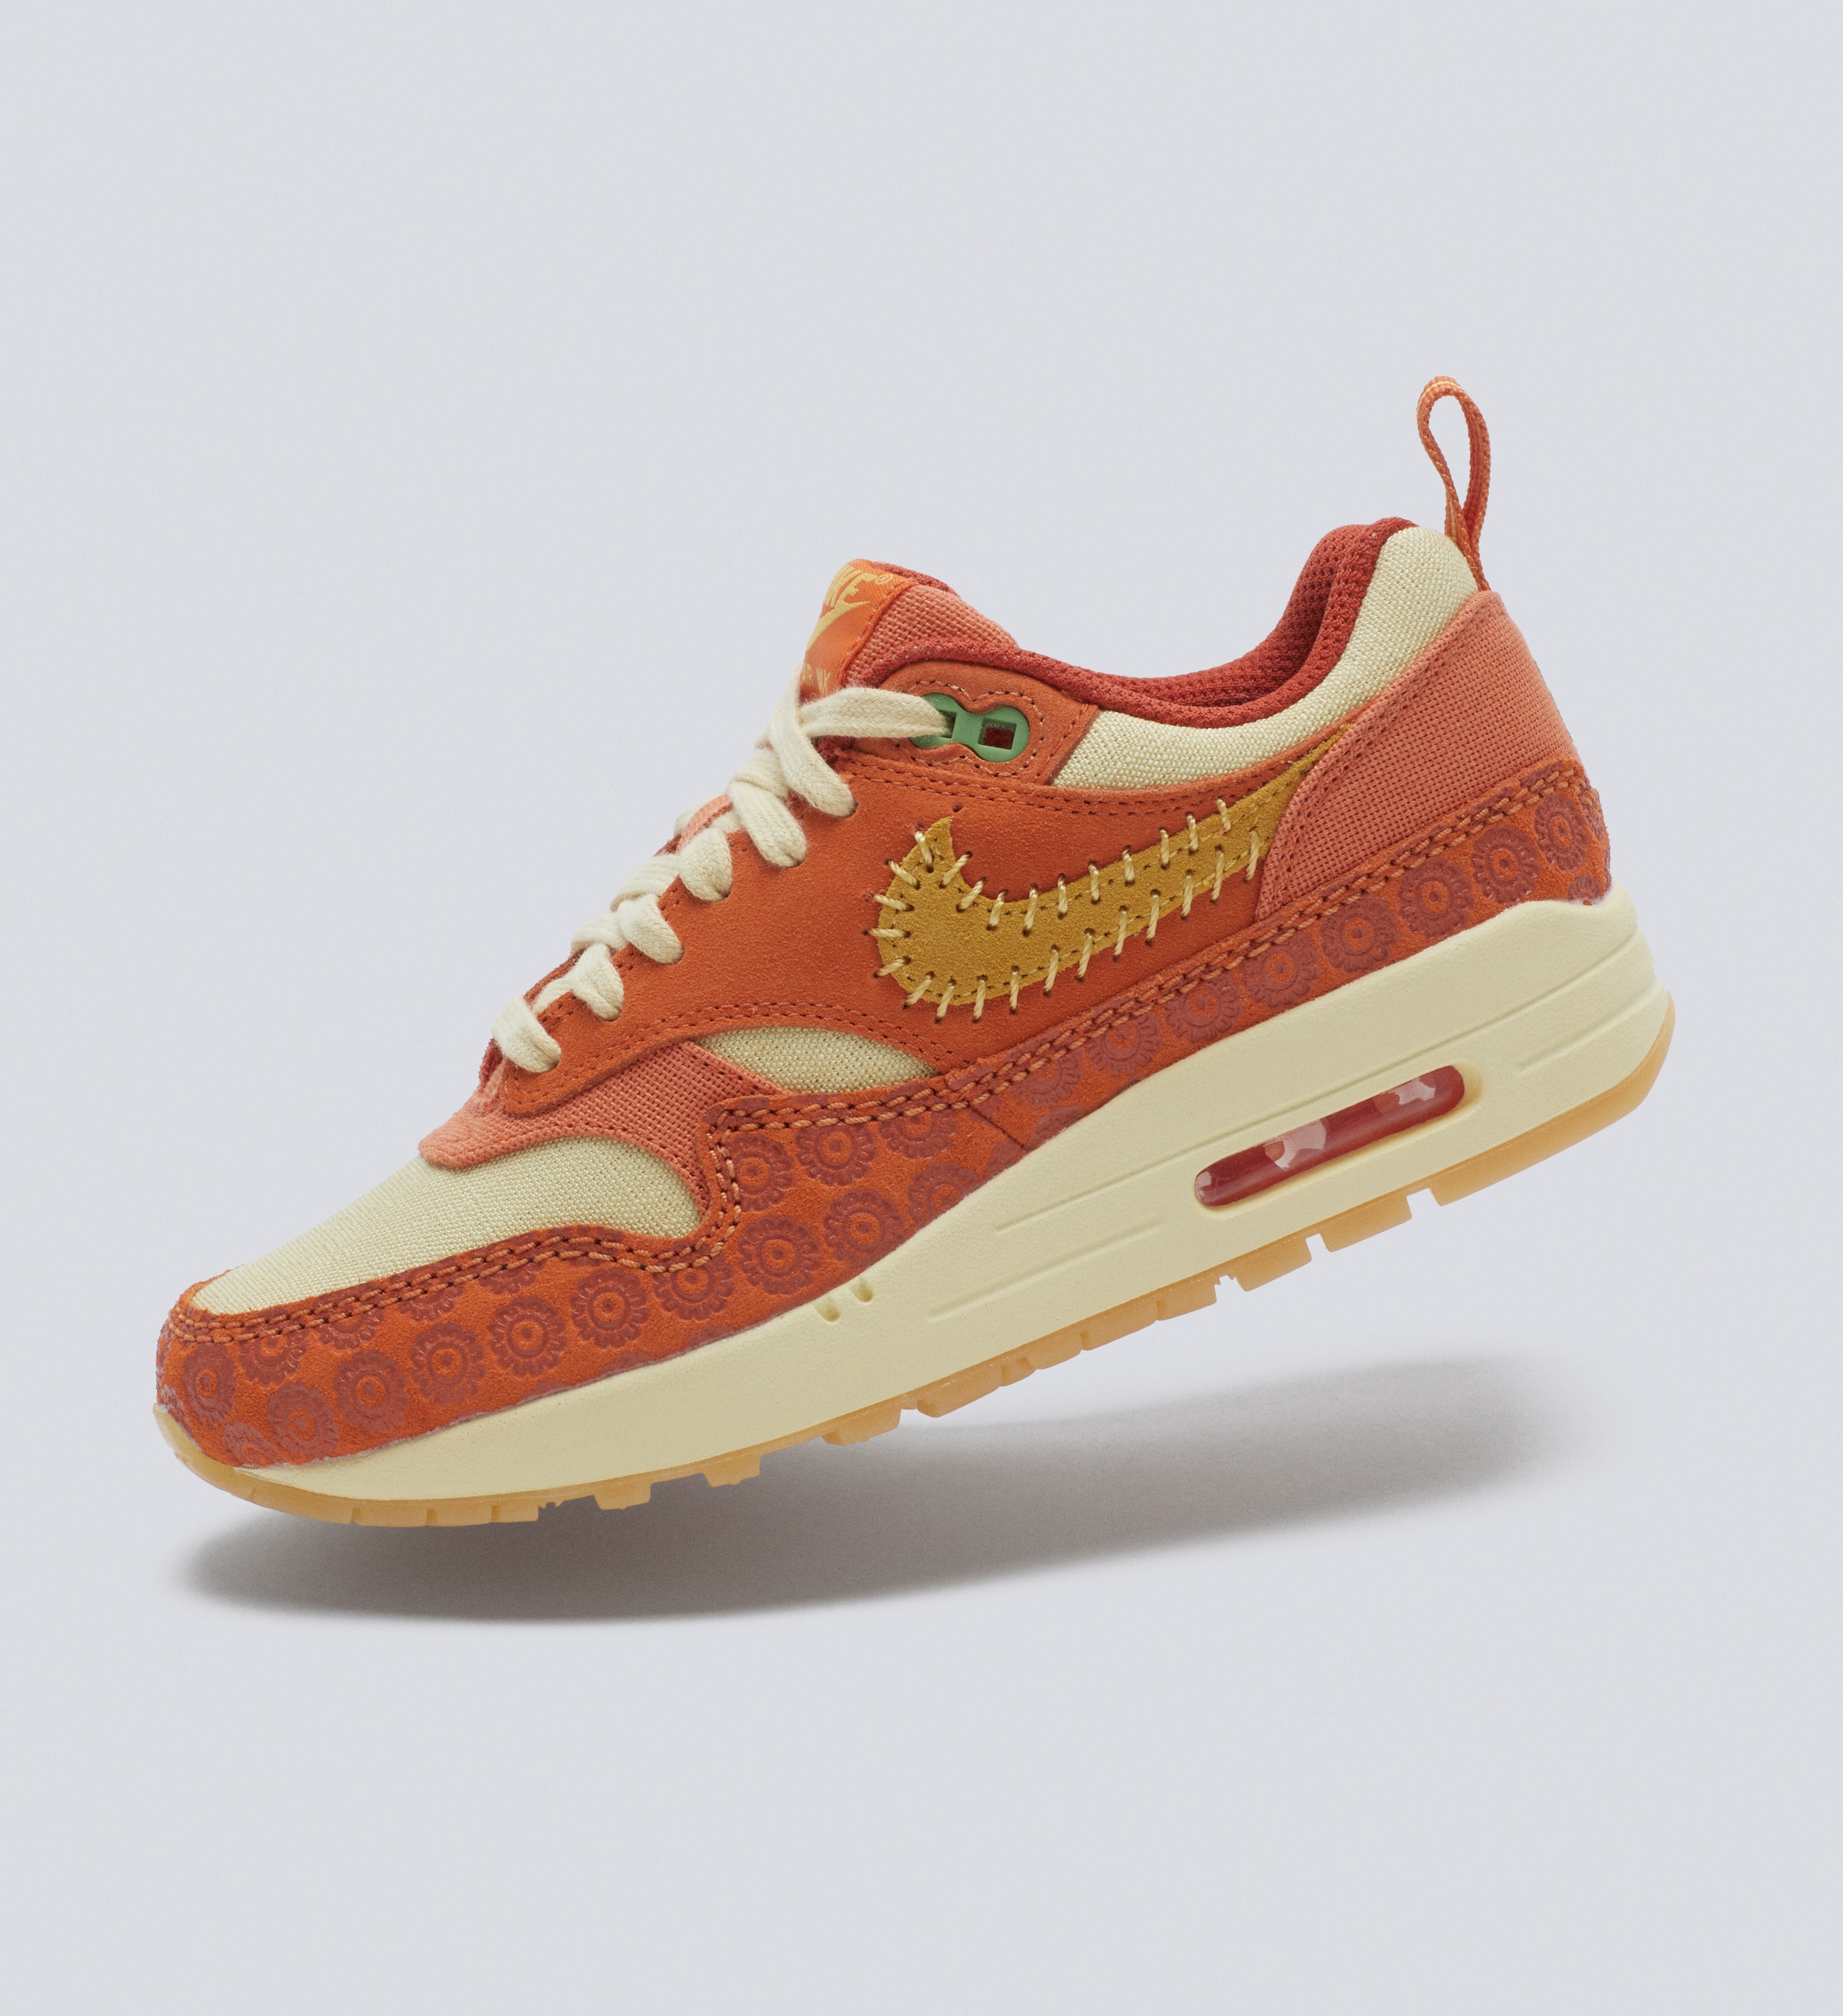 scrupulos Descifra Garanție  StockX on Twitter: "It's Air Max week over here, y'all 💥 To kick off the  celebration, we're sliding $75 in StockX site credit to THREE Air Max fans  Reply with a pic